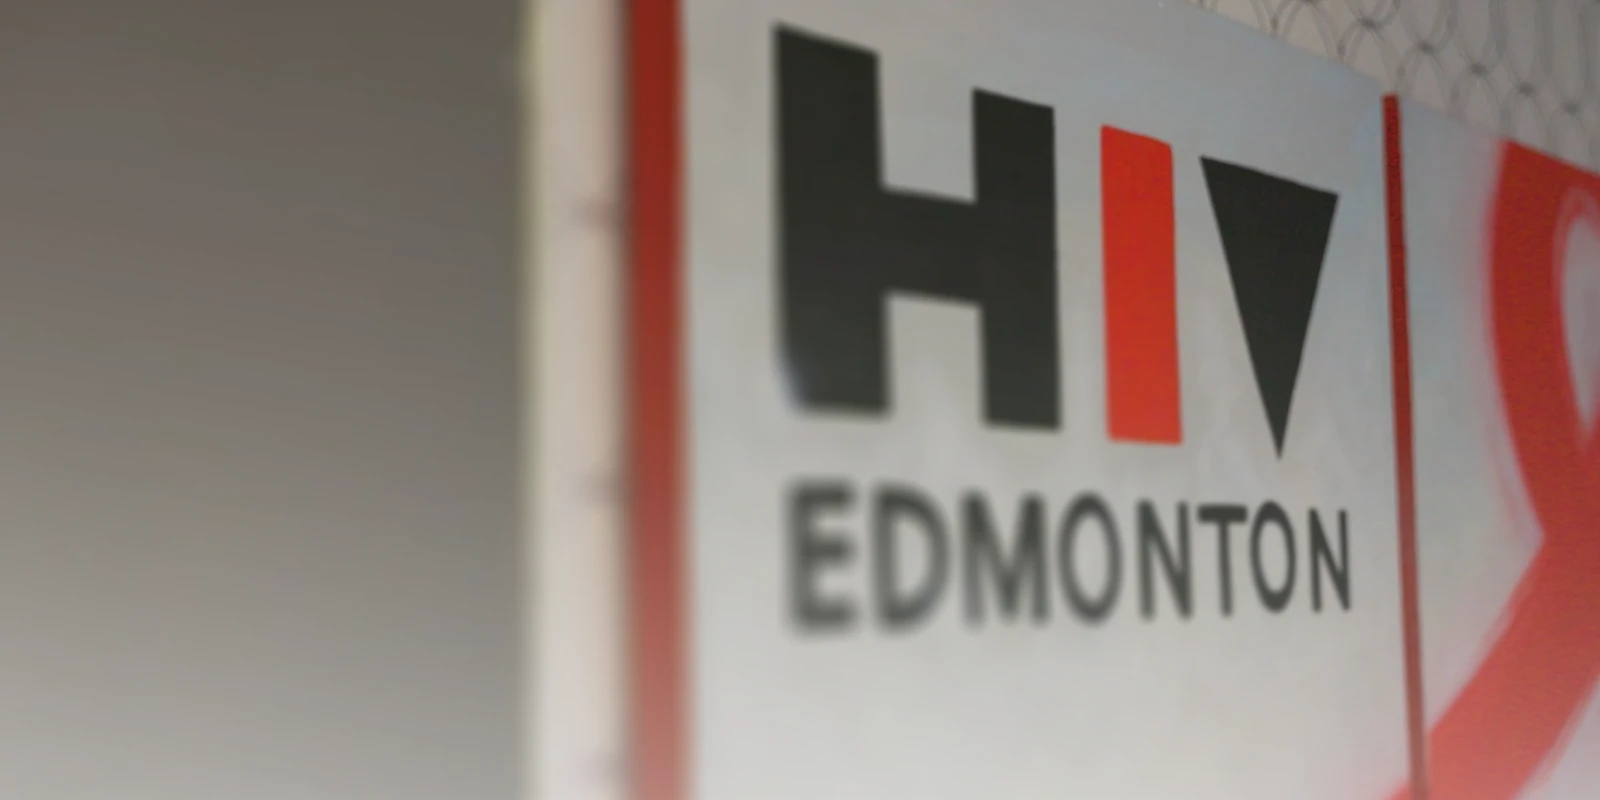 Close up view of the HIV Edmonton sign in the office